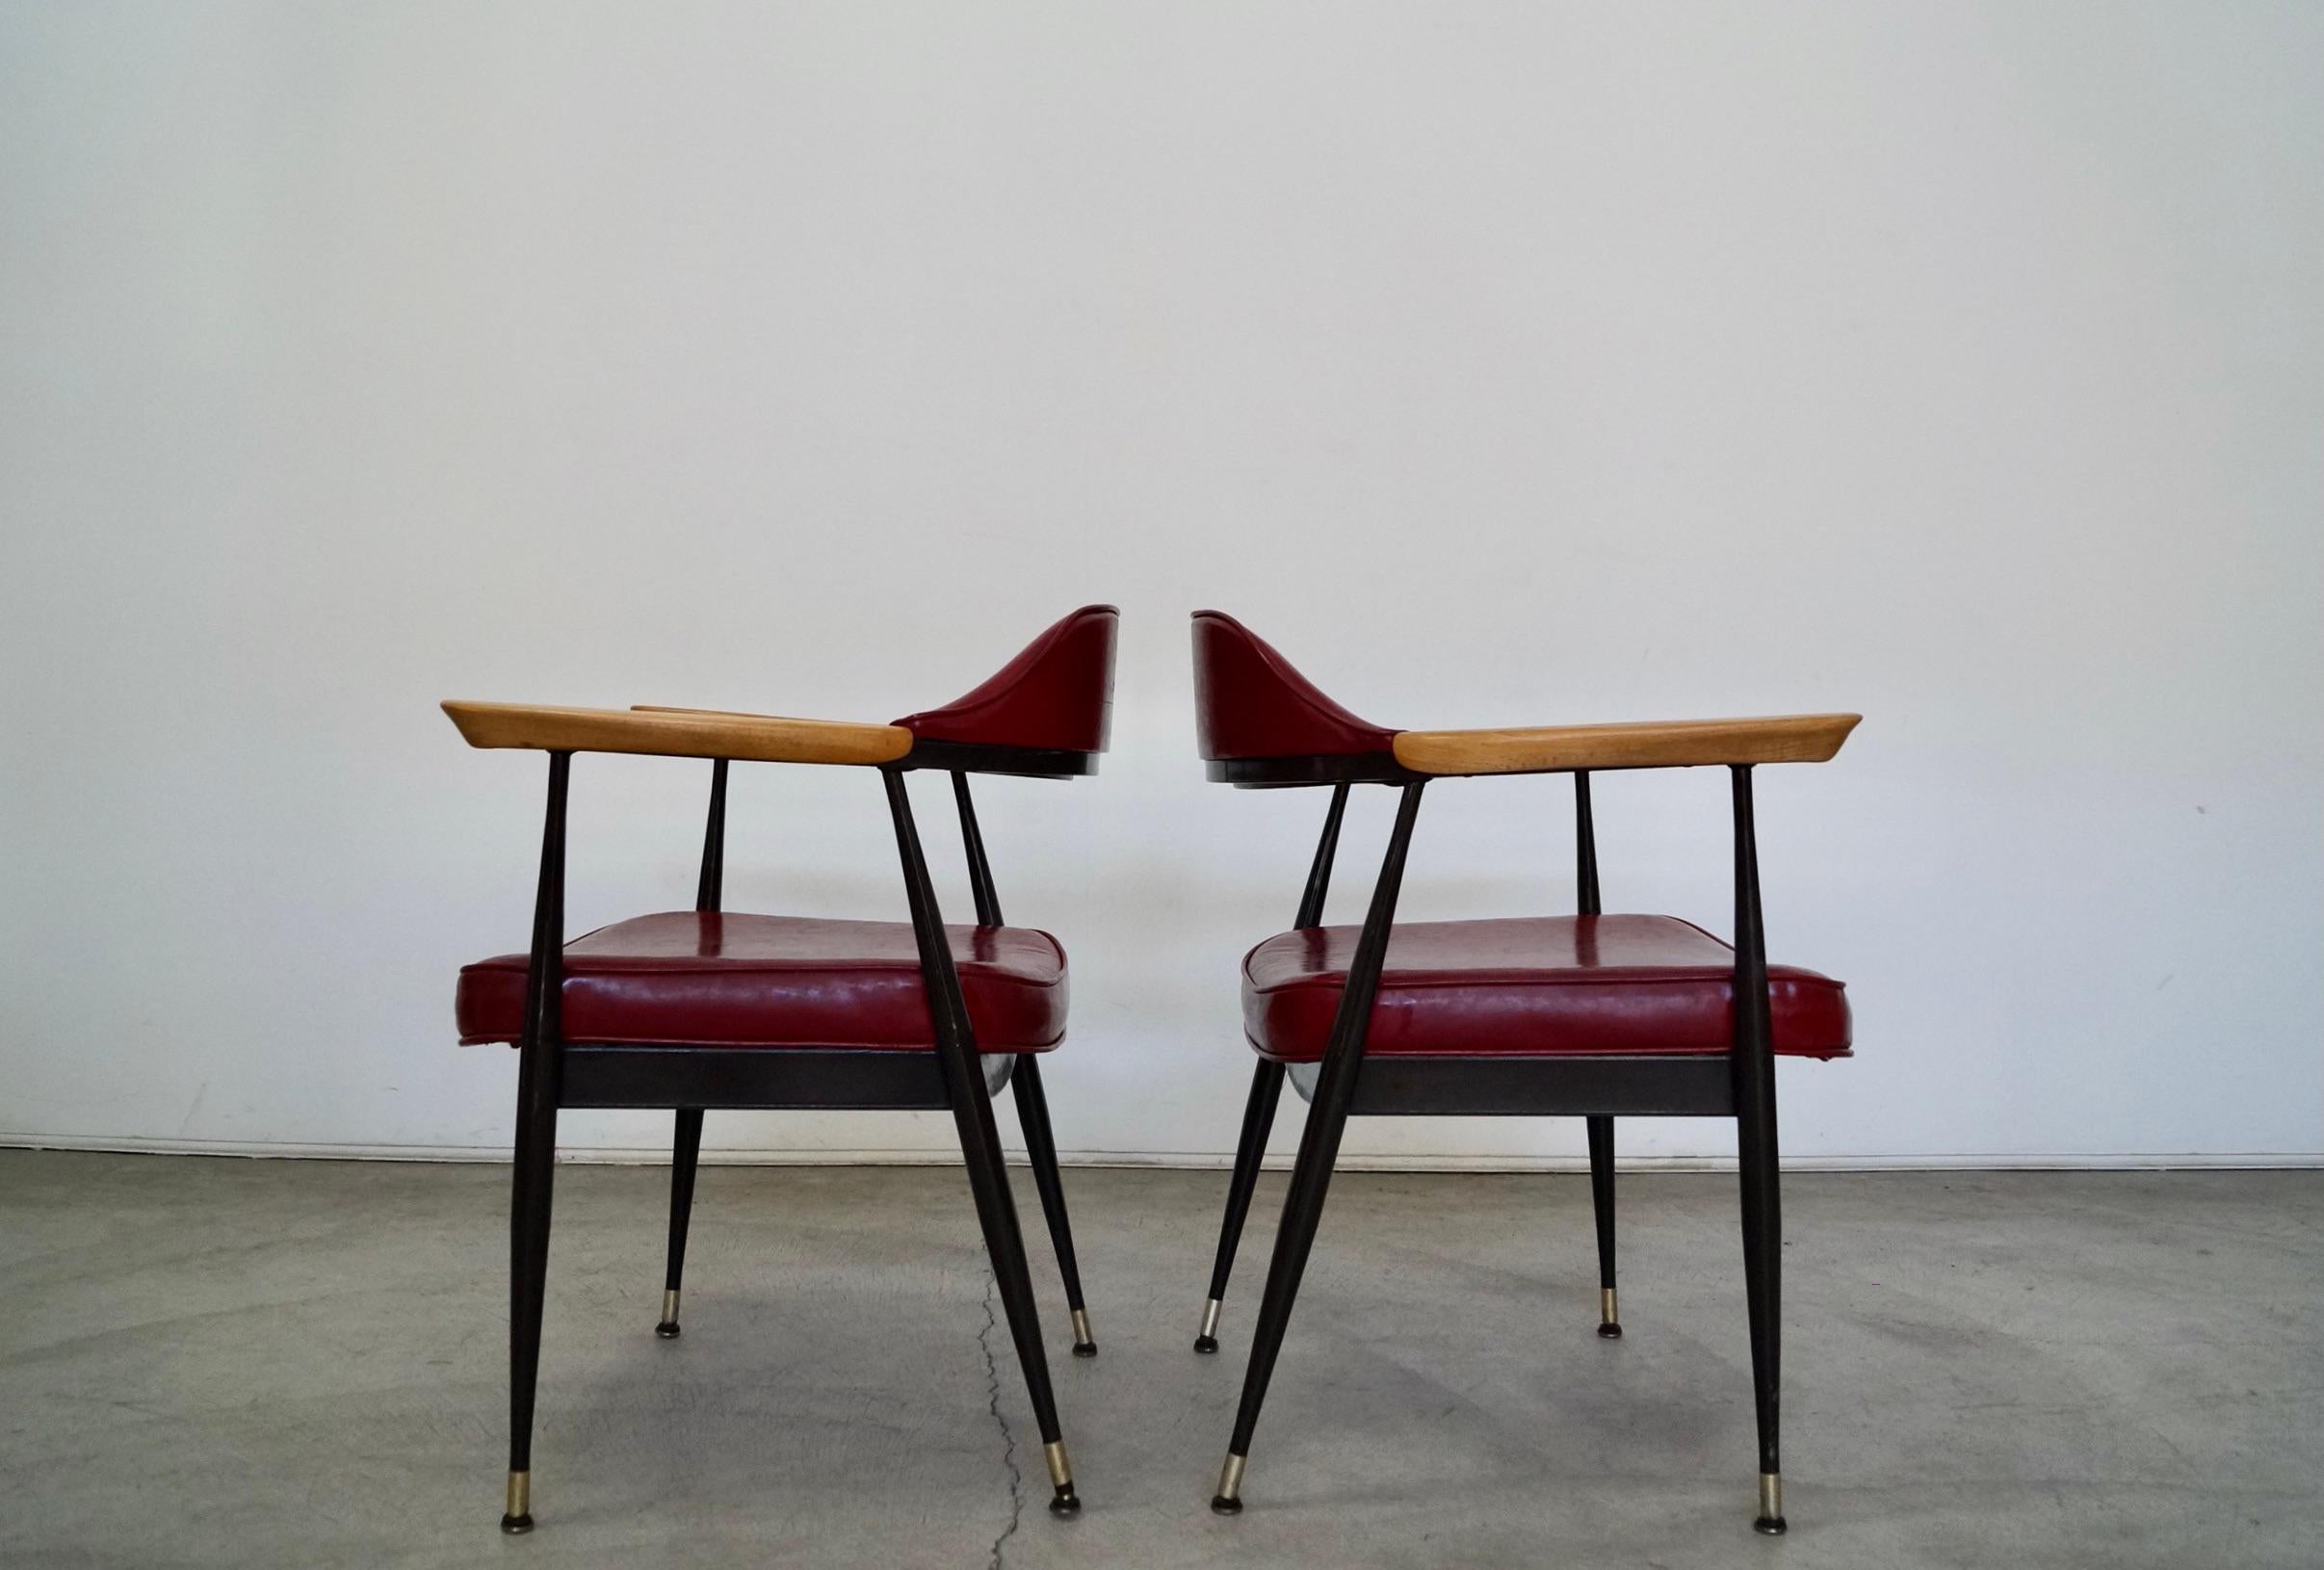 Late 20th Century 1970's Mid-Century Modern Metal & Wood Armchairs - a Pair For Sale